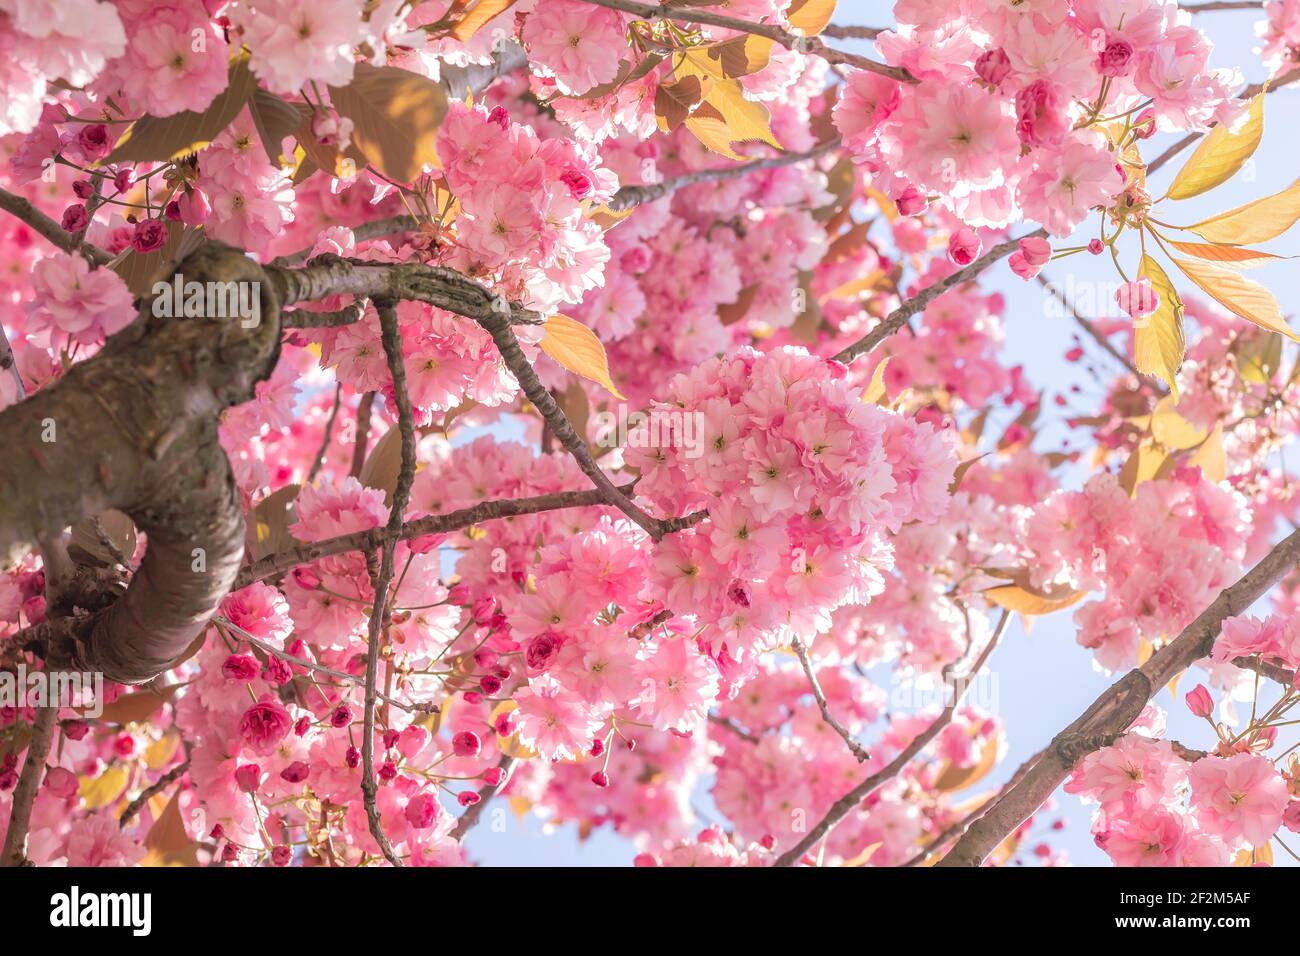 Prunus serrulata or japanese cherry tree cherry blossoms pink flowers blooming in spring Stock Photo